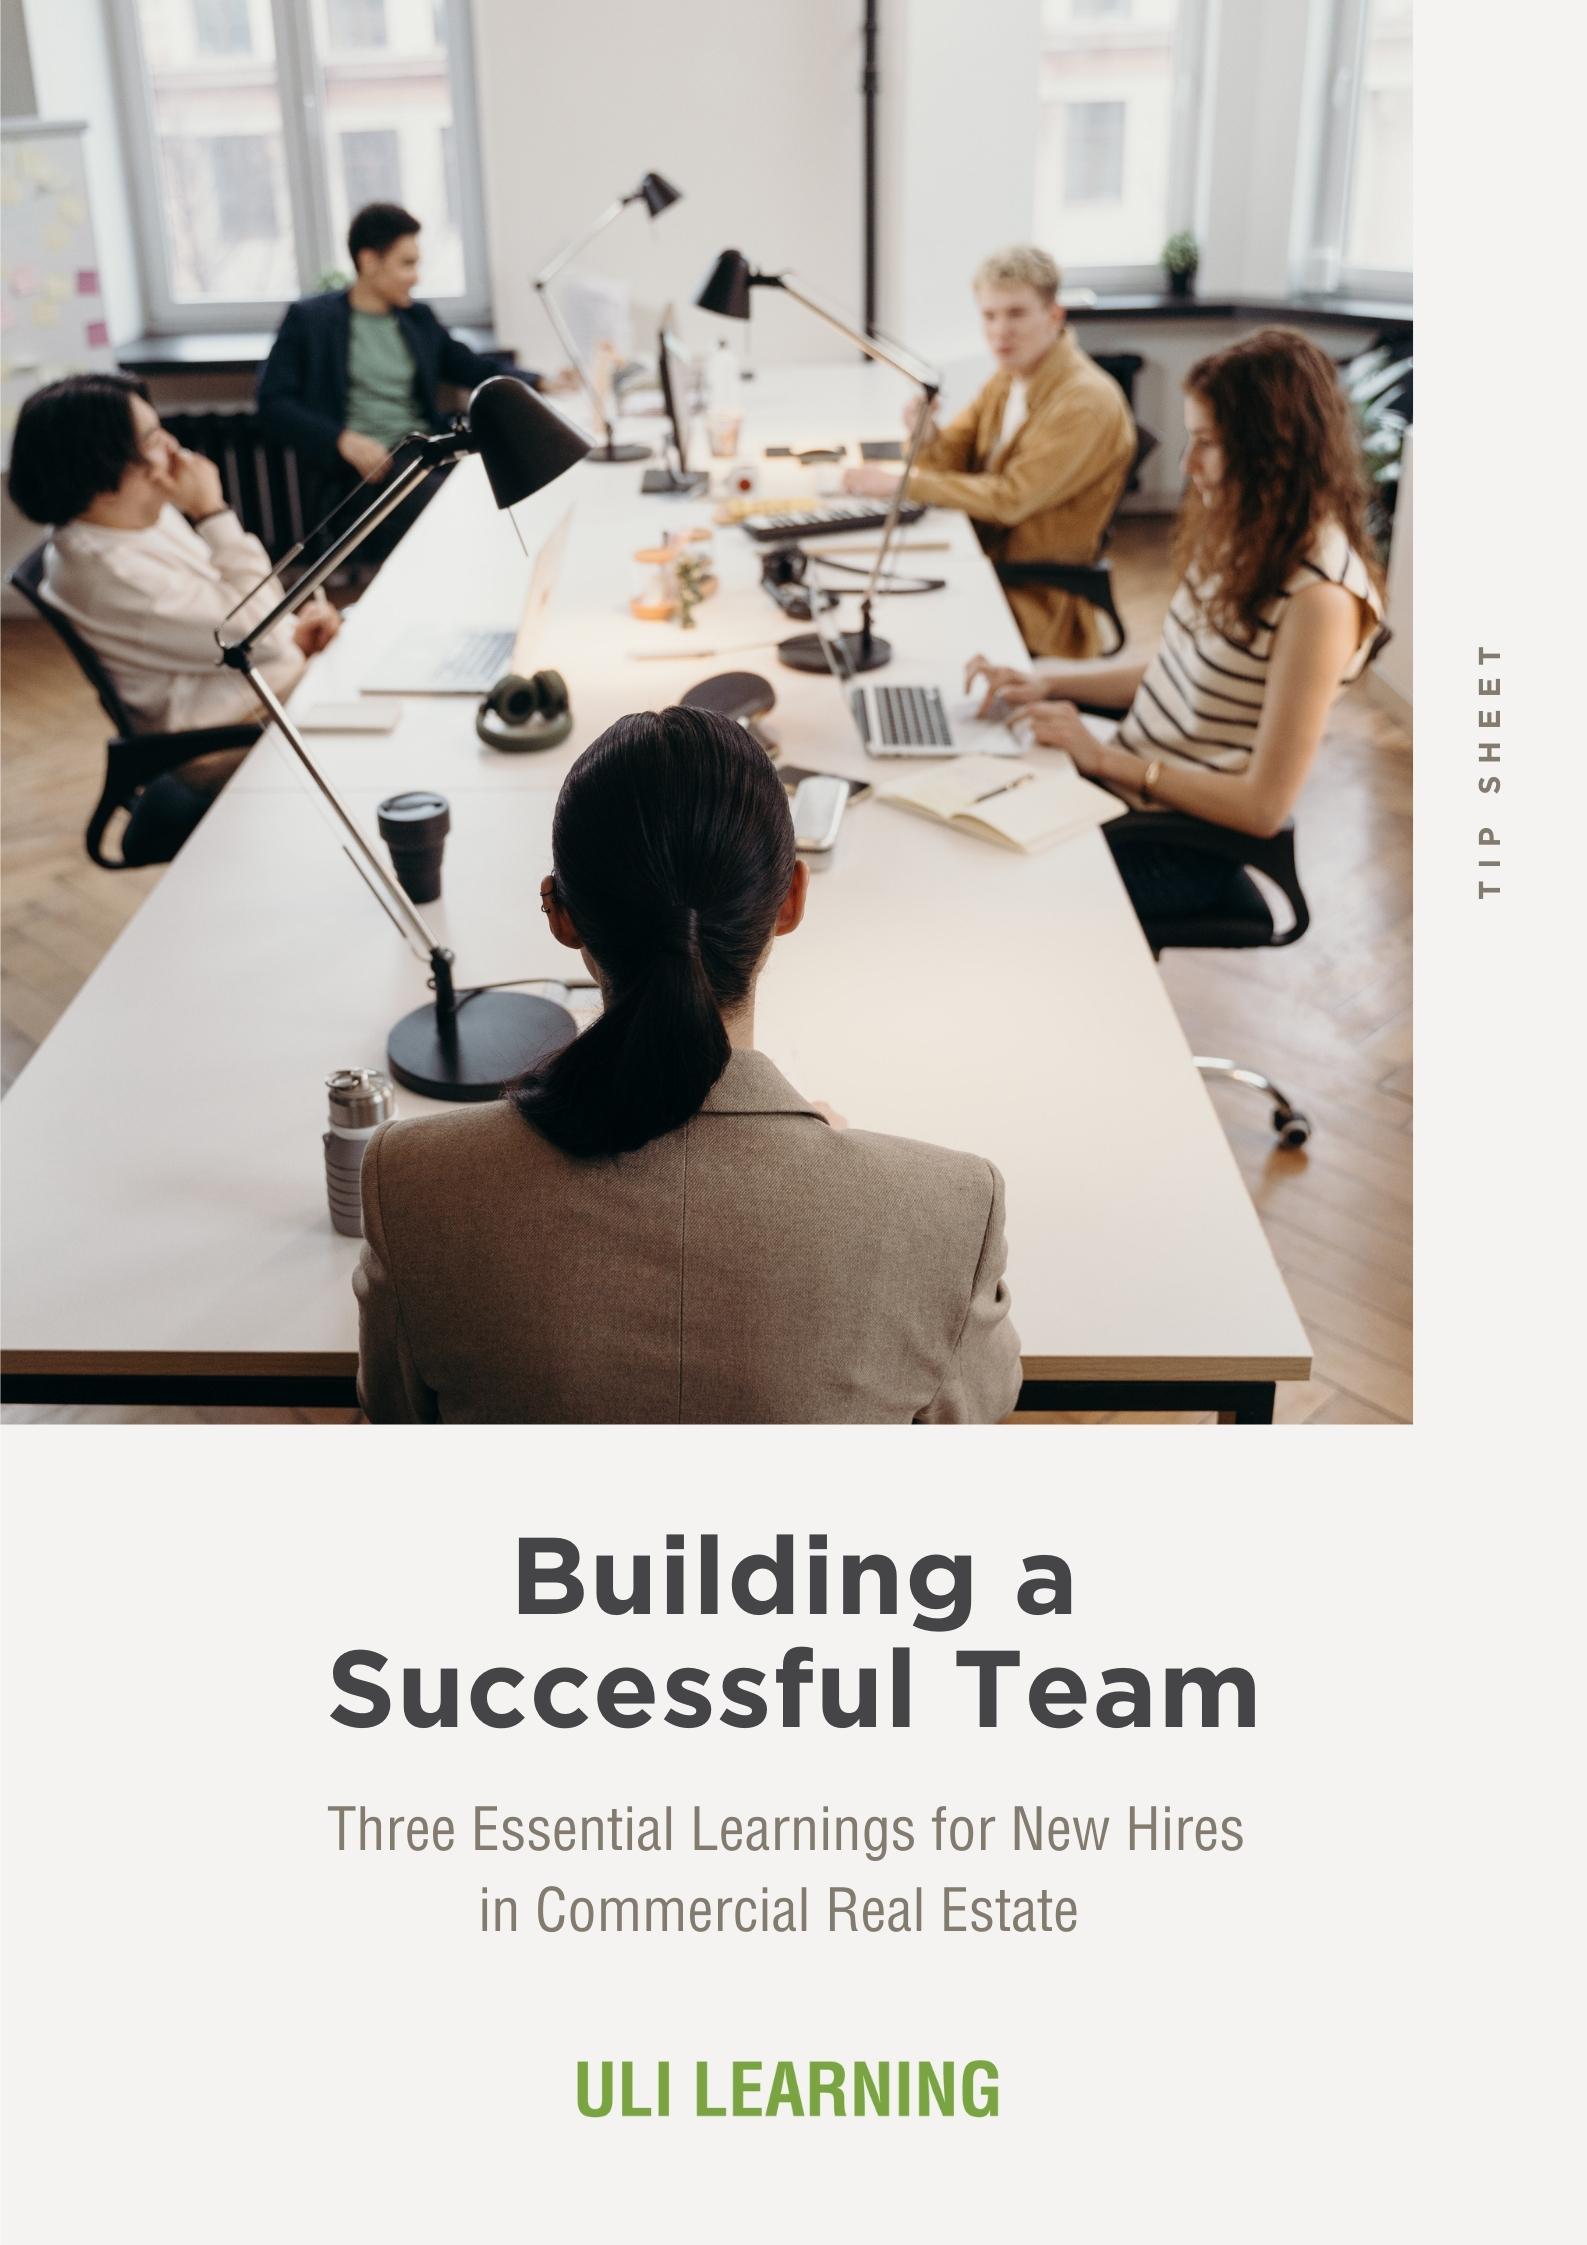 PDF guide to launching a successful team in commercial real estate